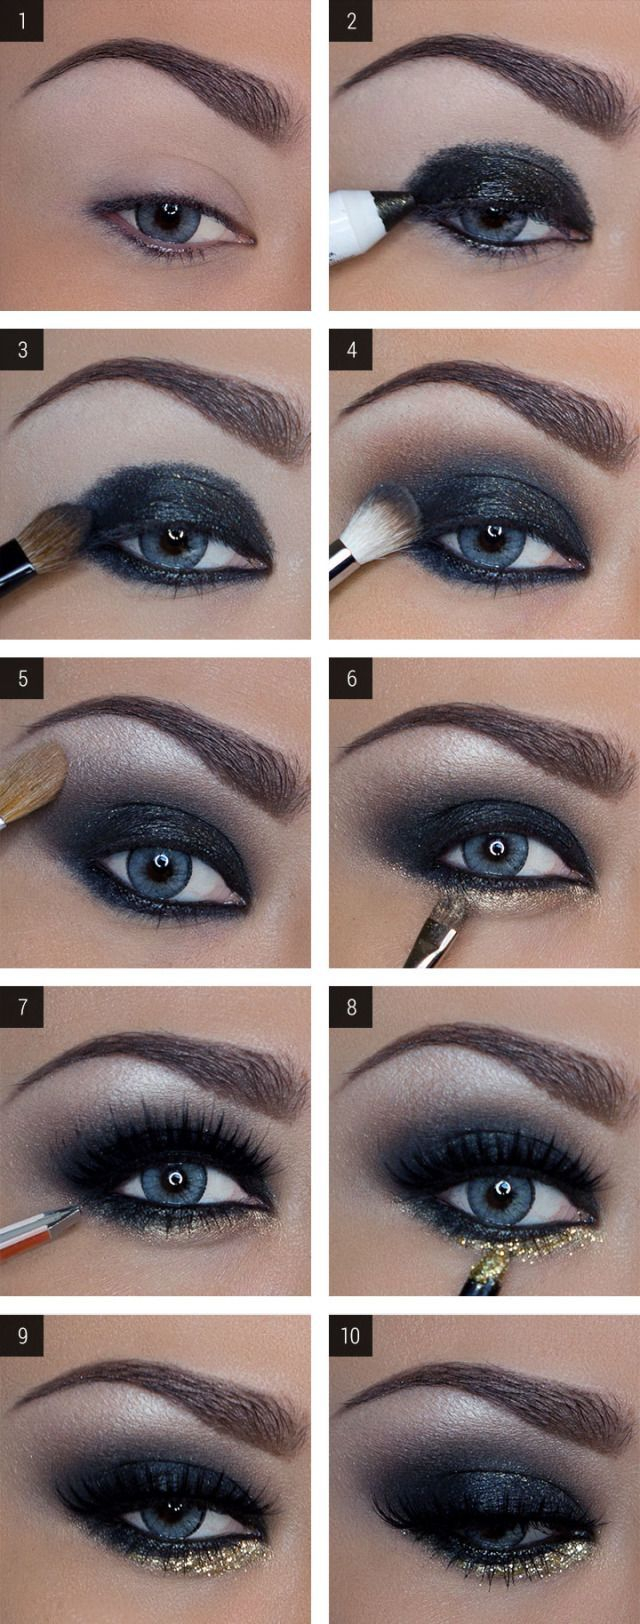 Cool Black Eye Makeup Simple Party Makeup Tips For Black Women To Look Gorgeous